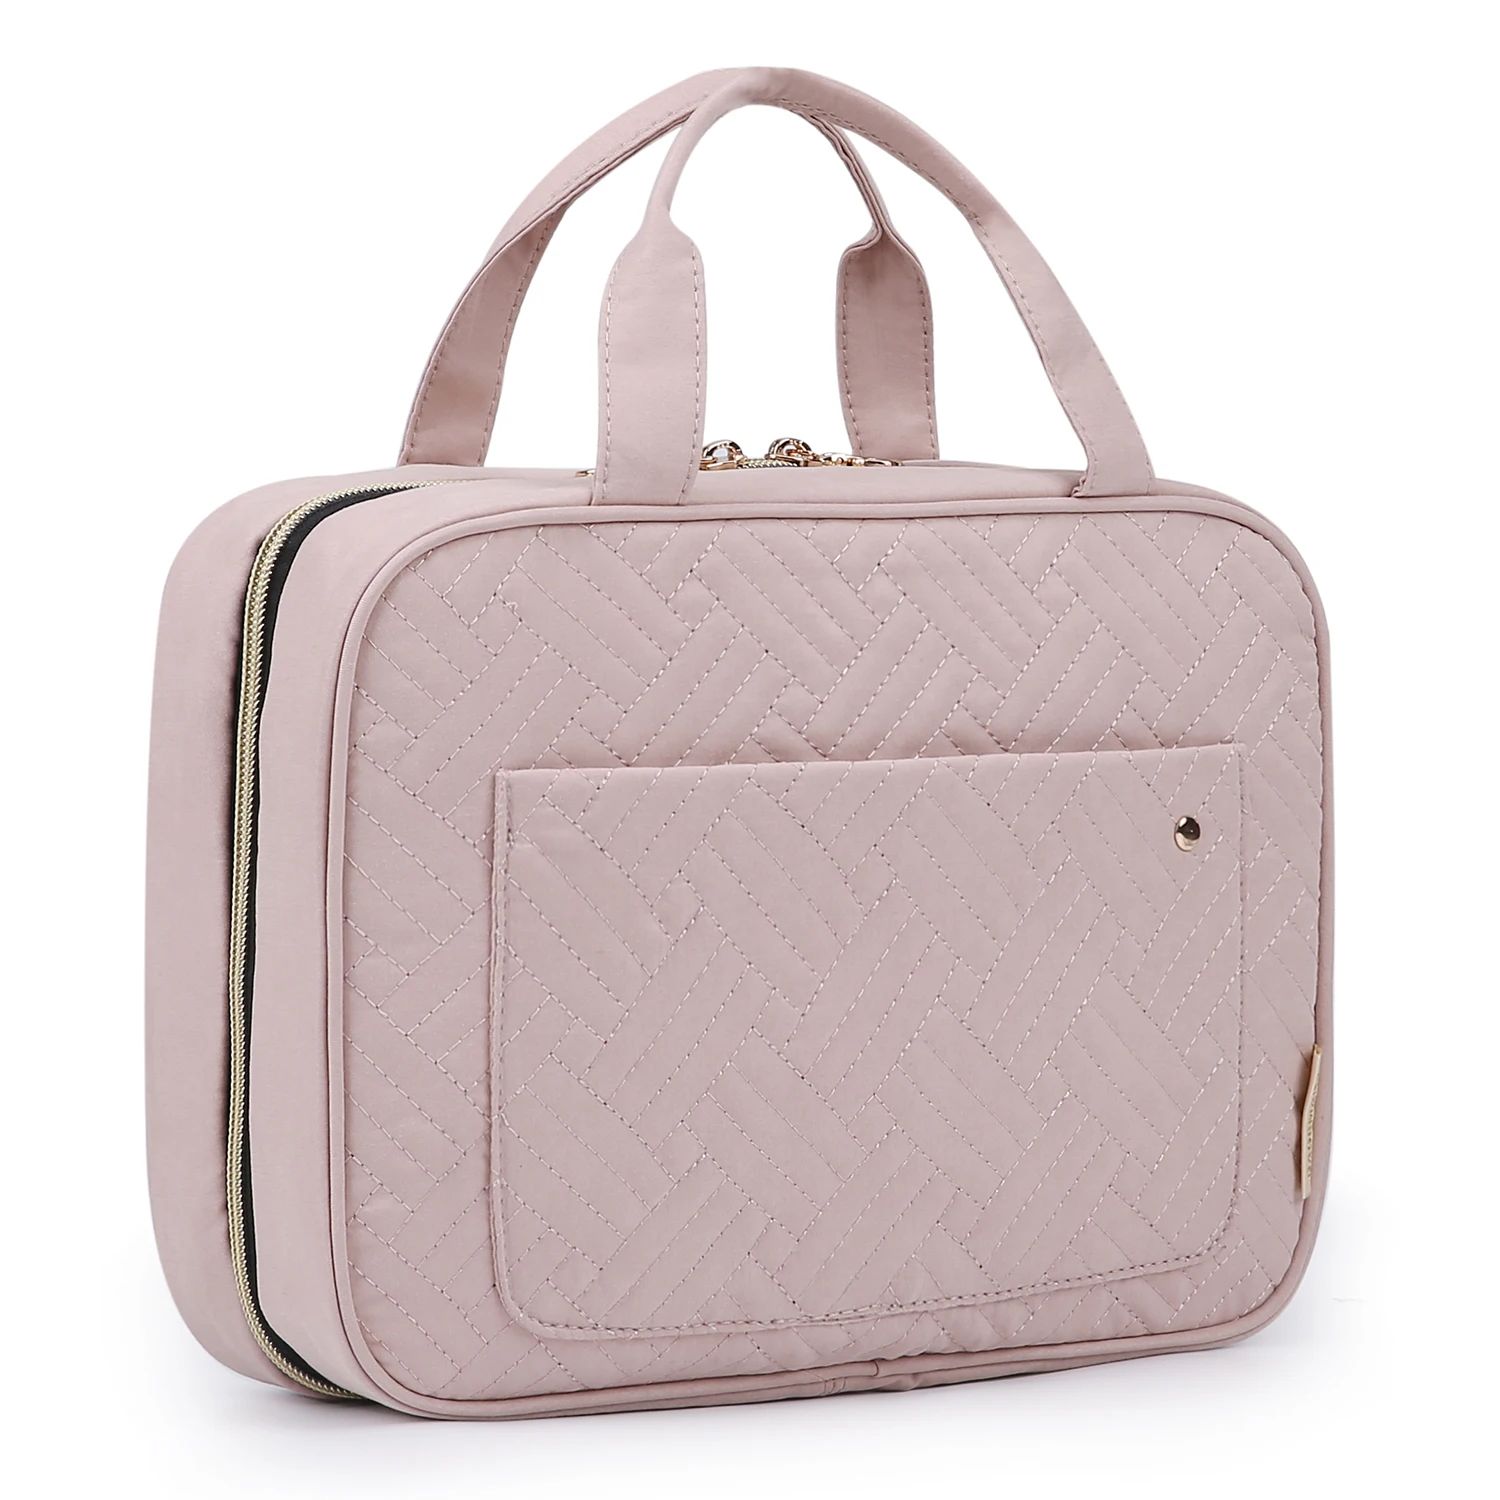 Taille: 32L 10W 23H CMCOLOR: Pink